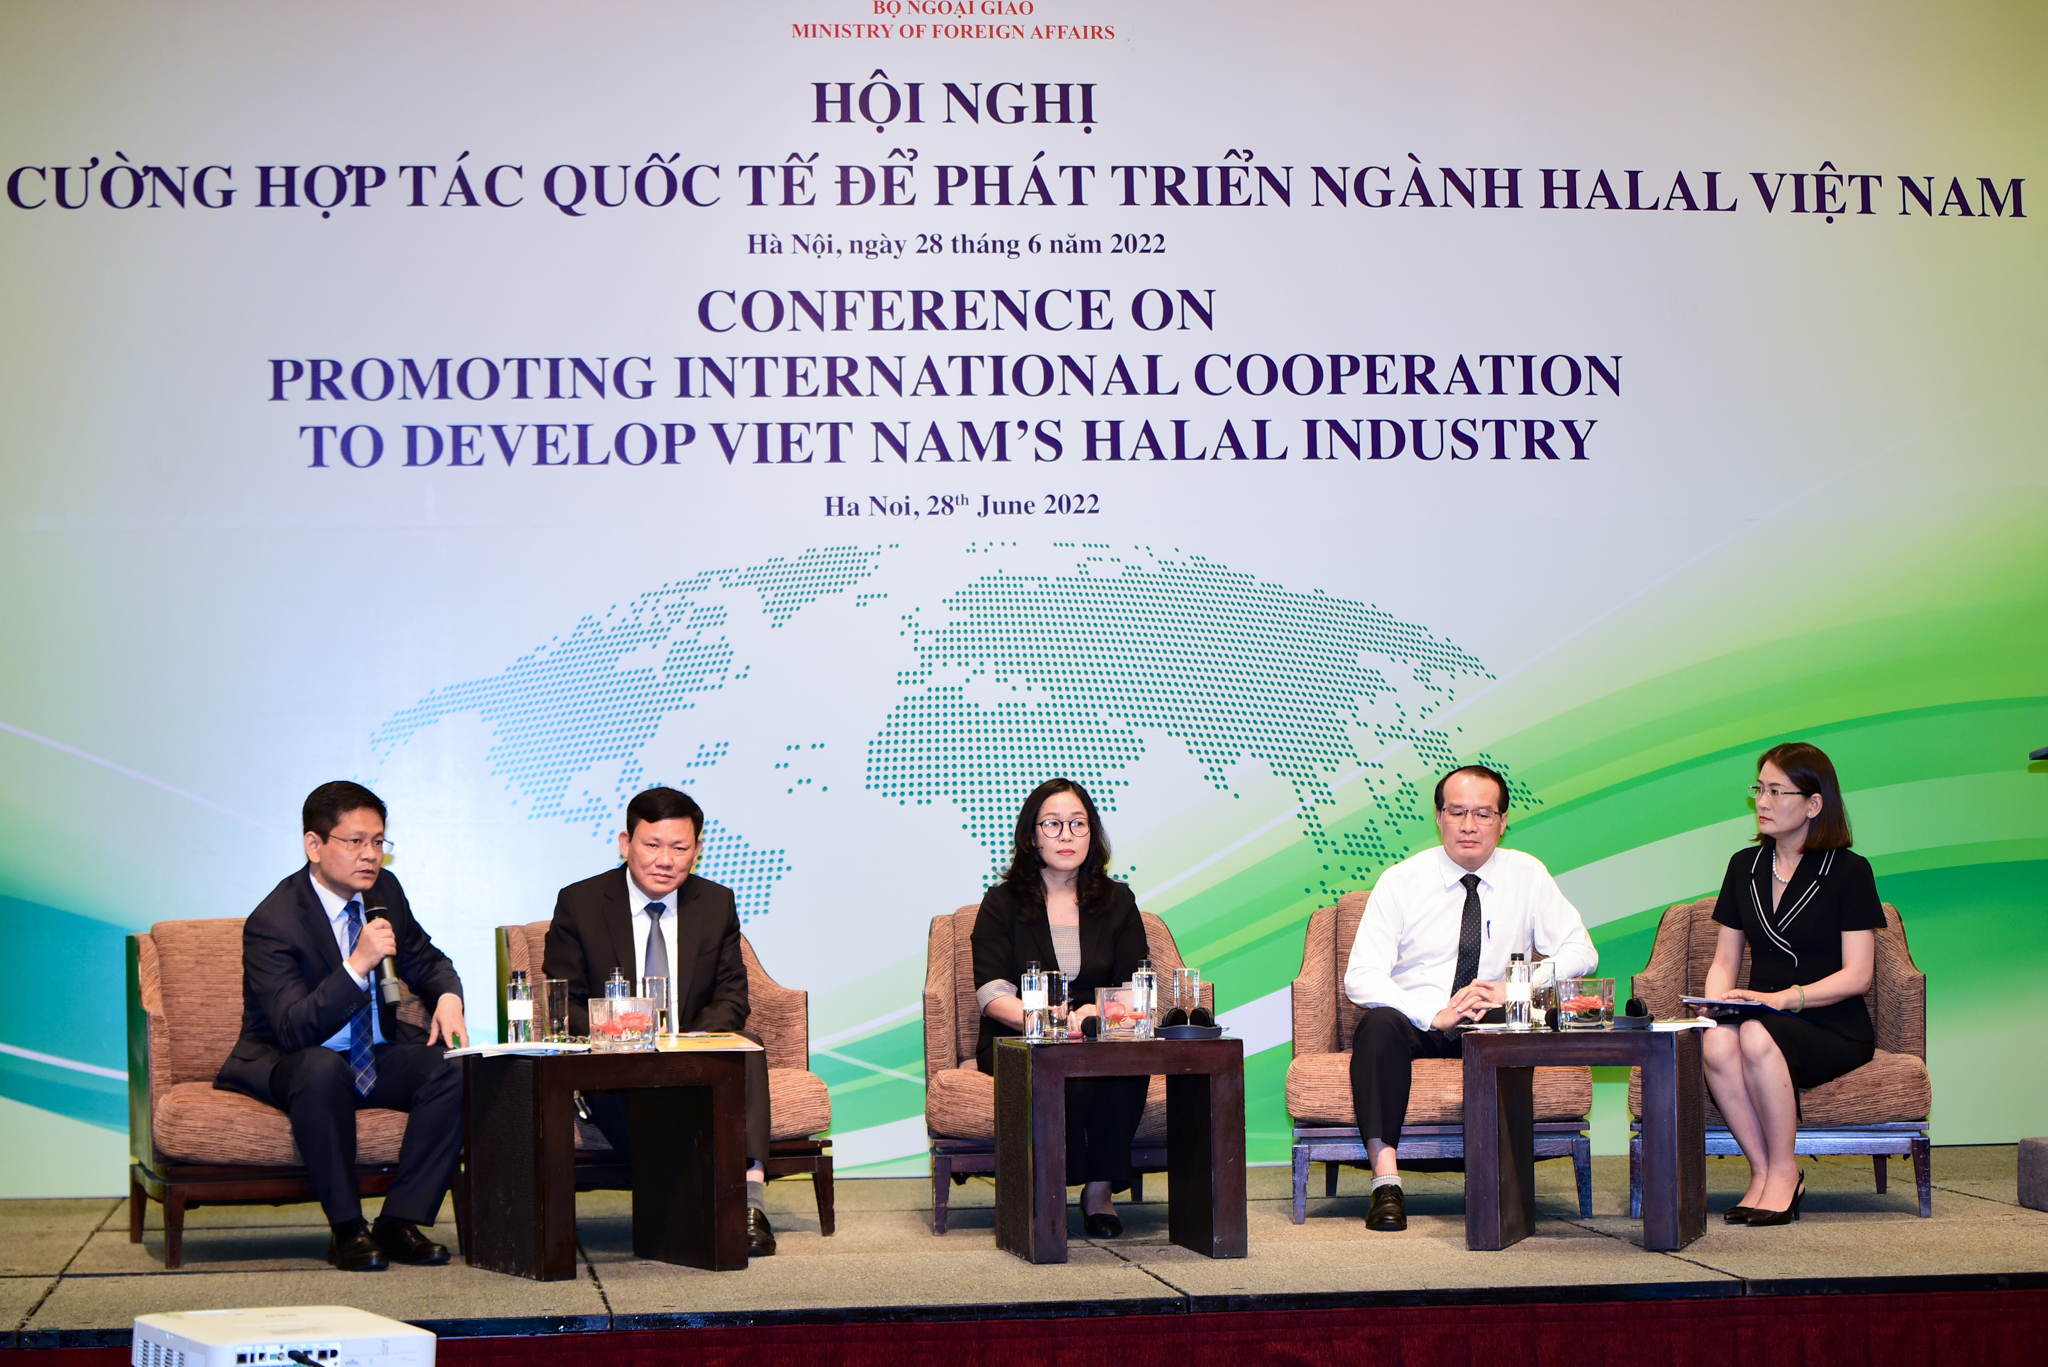 At the conference, localities, businesses, and regulatory agencies discussed solutions to exploit the potential of the Halal market. Photo: Tung Dinh.